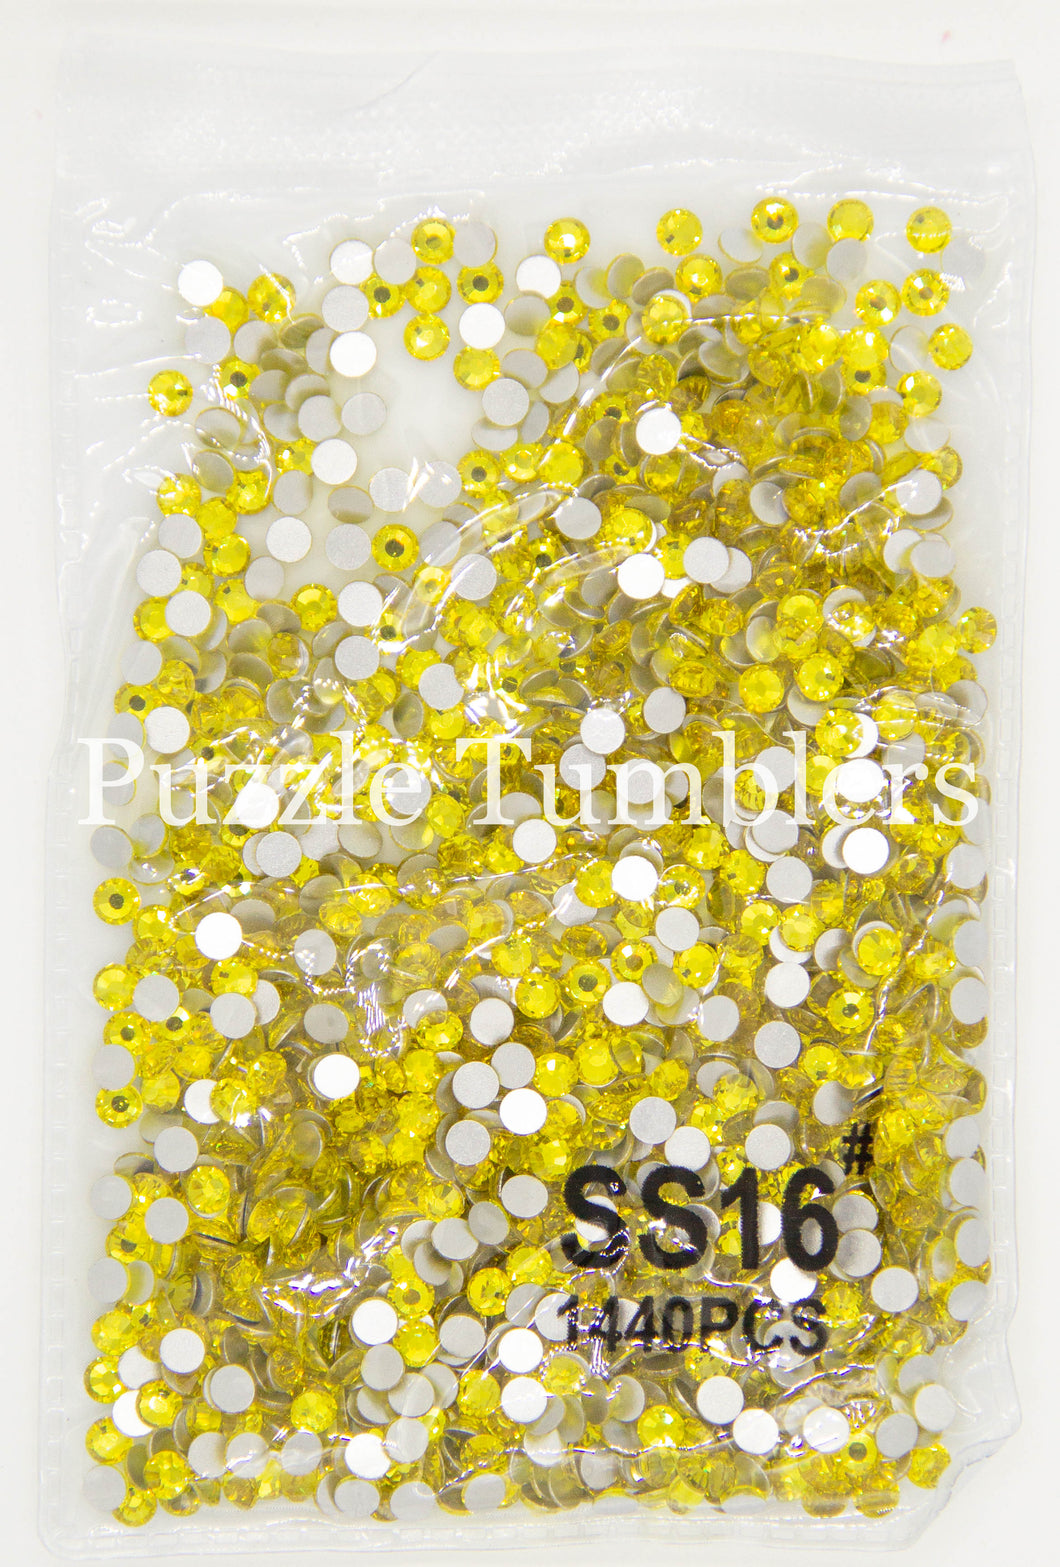 NEW CITRINE Rhinestones AB/Clear Glass Crystal Stones (NON-Hot Fix) SS16